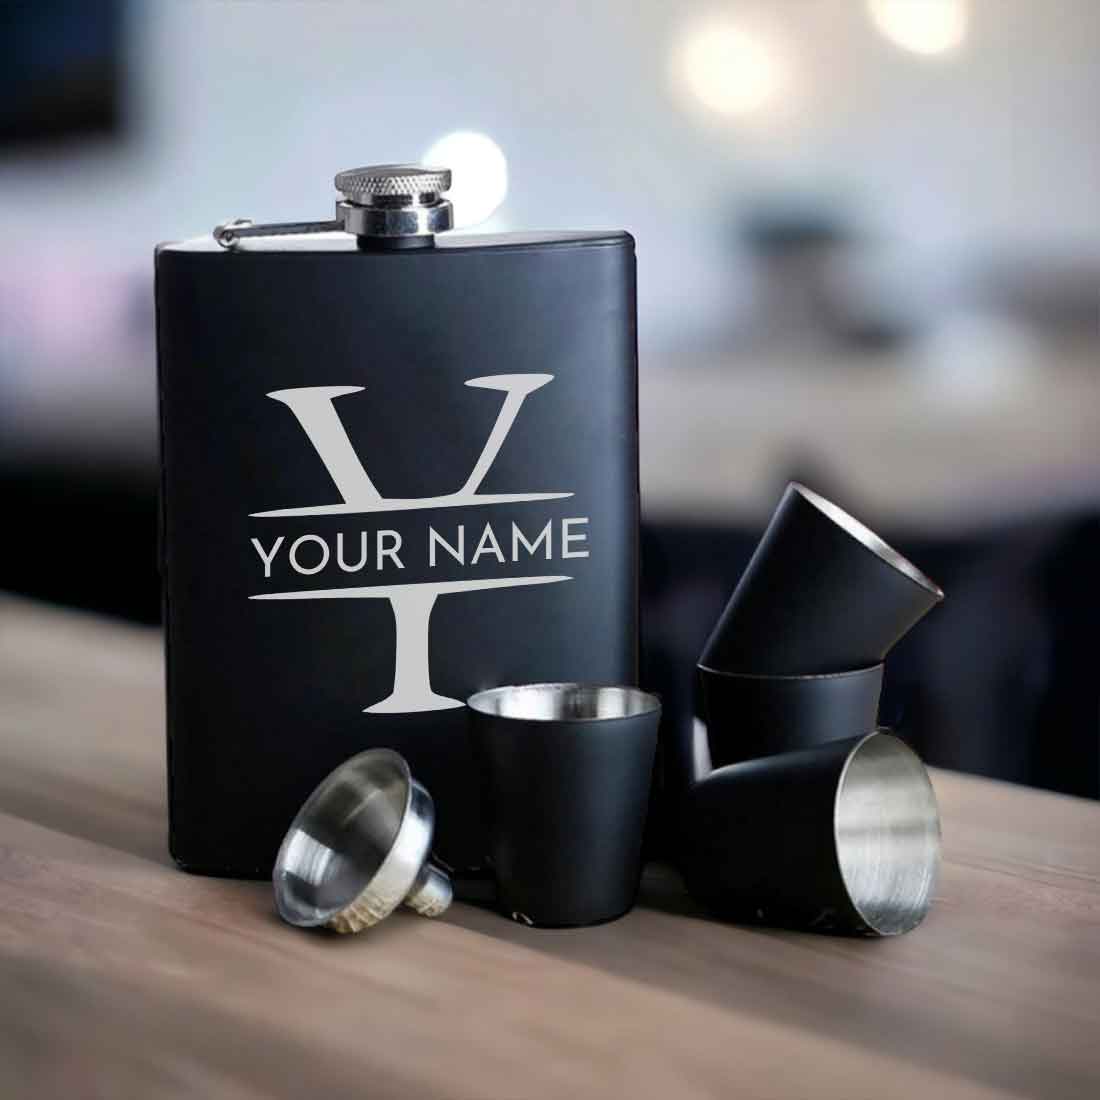 Personalized Gifts for Him - Custom Engraved Gifts & Keepsakes for Men &  Boys| Thomas Dale Co.